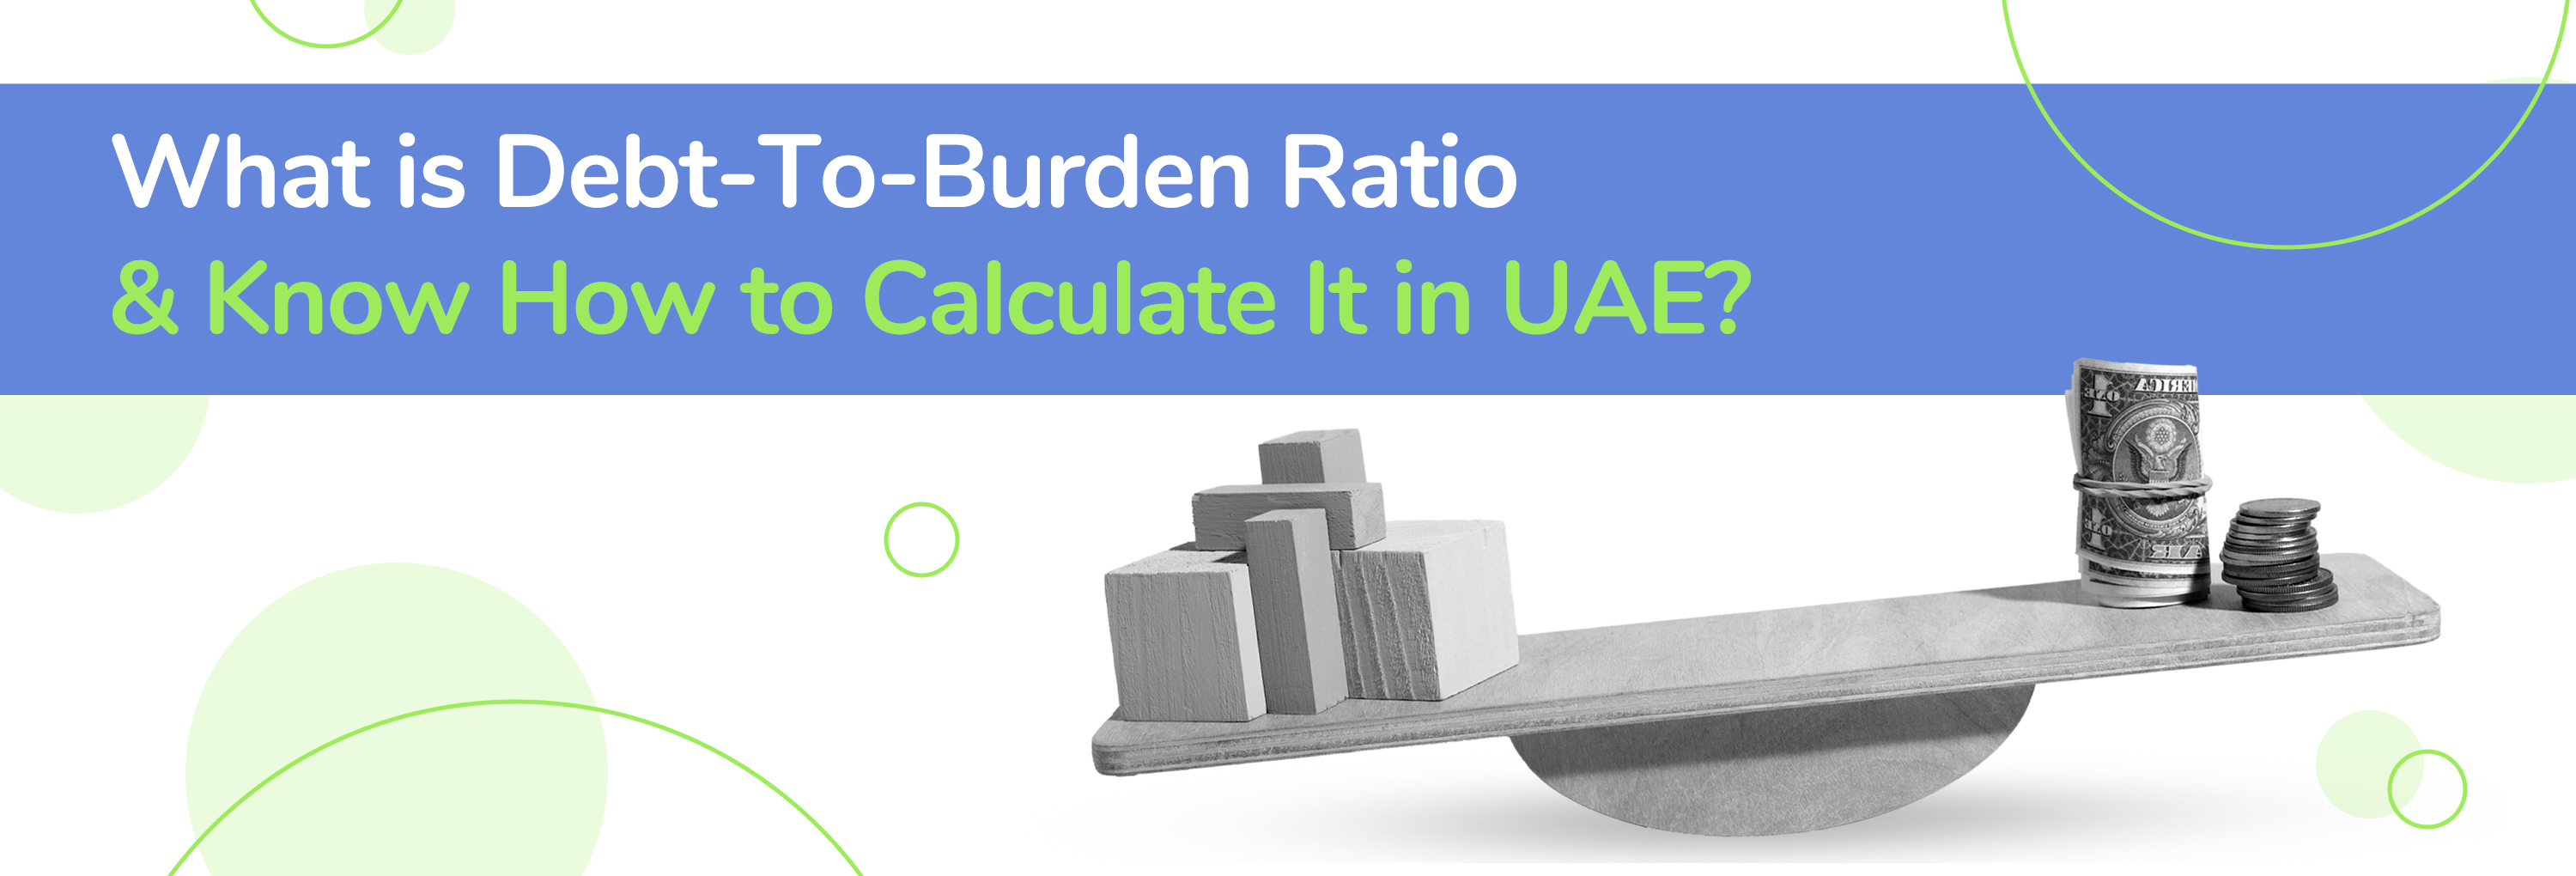 What is Debt-To-Burden Ratio & Know How to Calculate It in UAE?